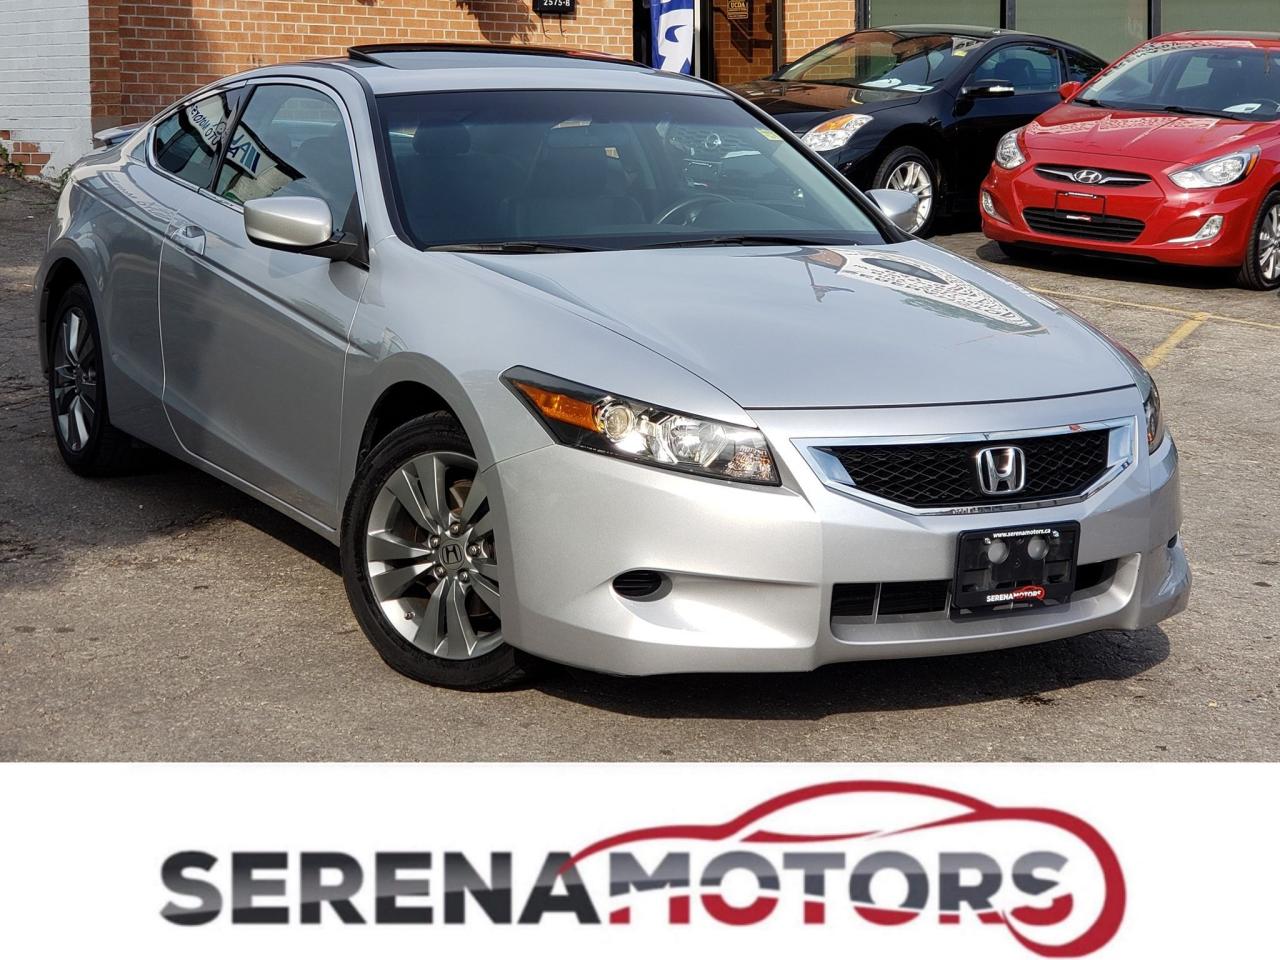 2008 Honda Accord EX-L | MANUAL | ONE OWNER | NO ACCIDENTS | LOW KM - Photo #1